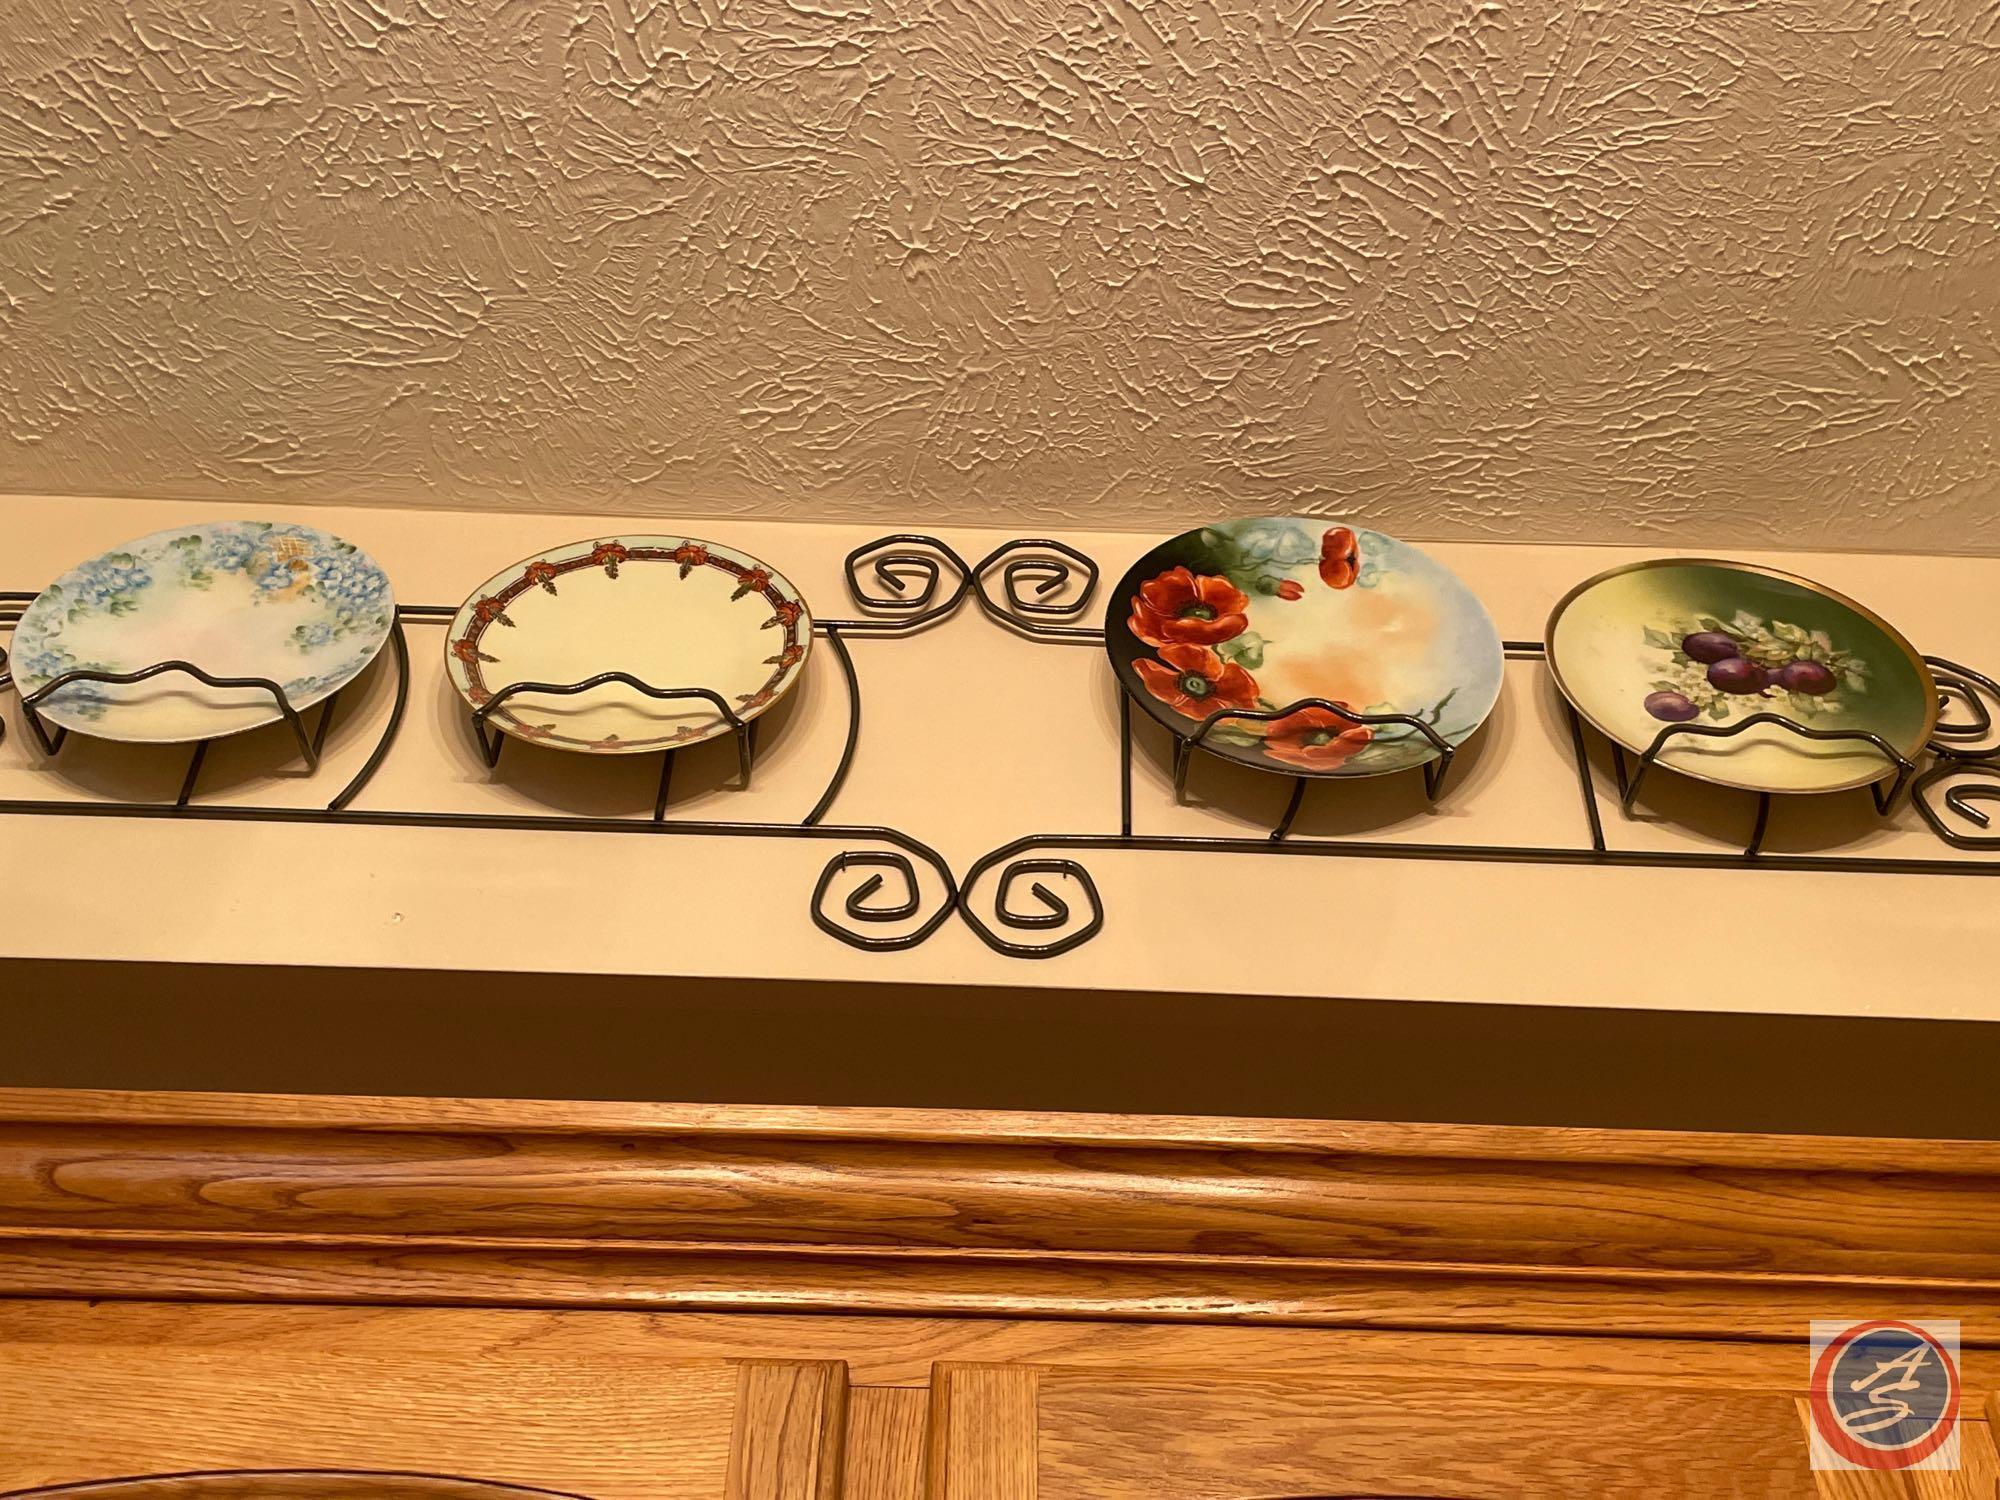 (2) Three Plate Wall Displays, (2) Four Plate Wall Displays, Wall Hanging Two Compartment Mail